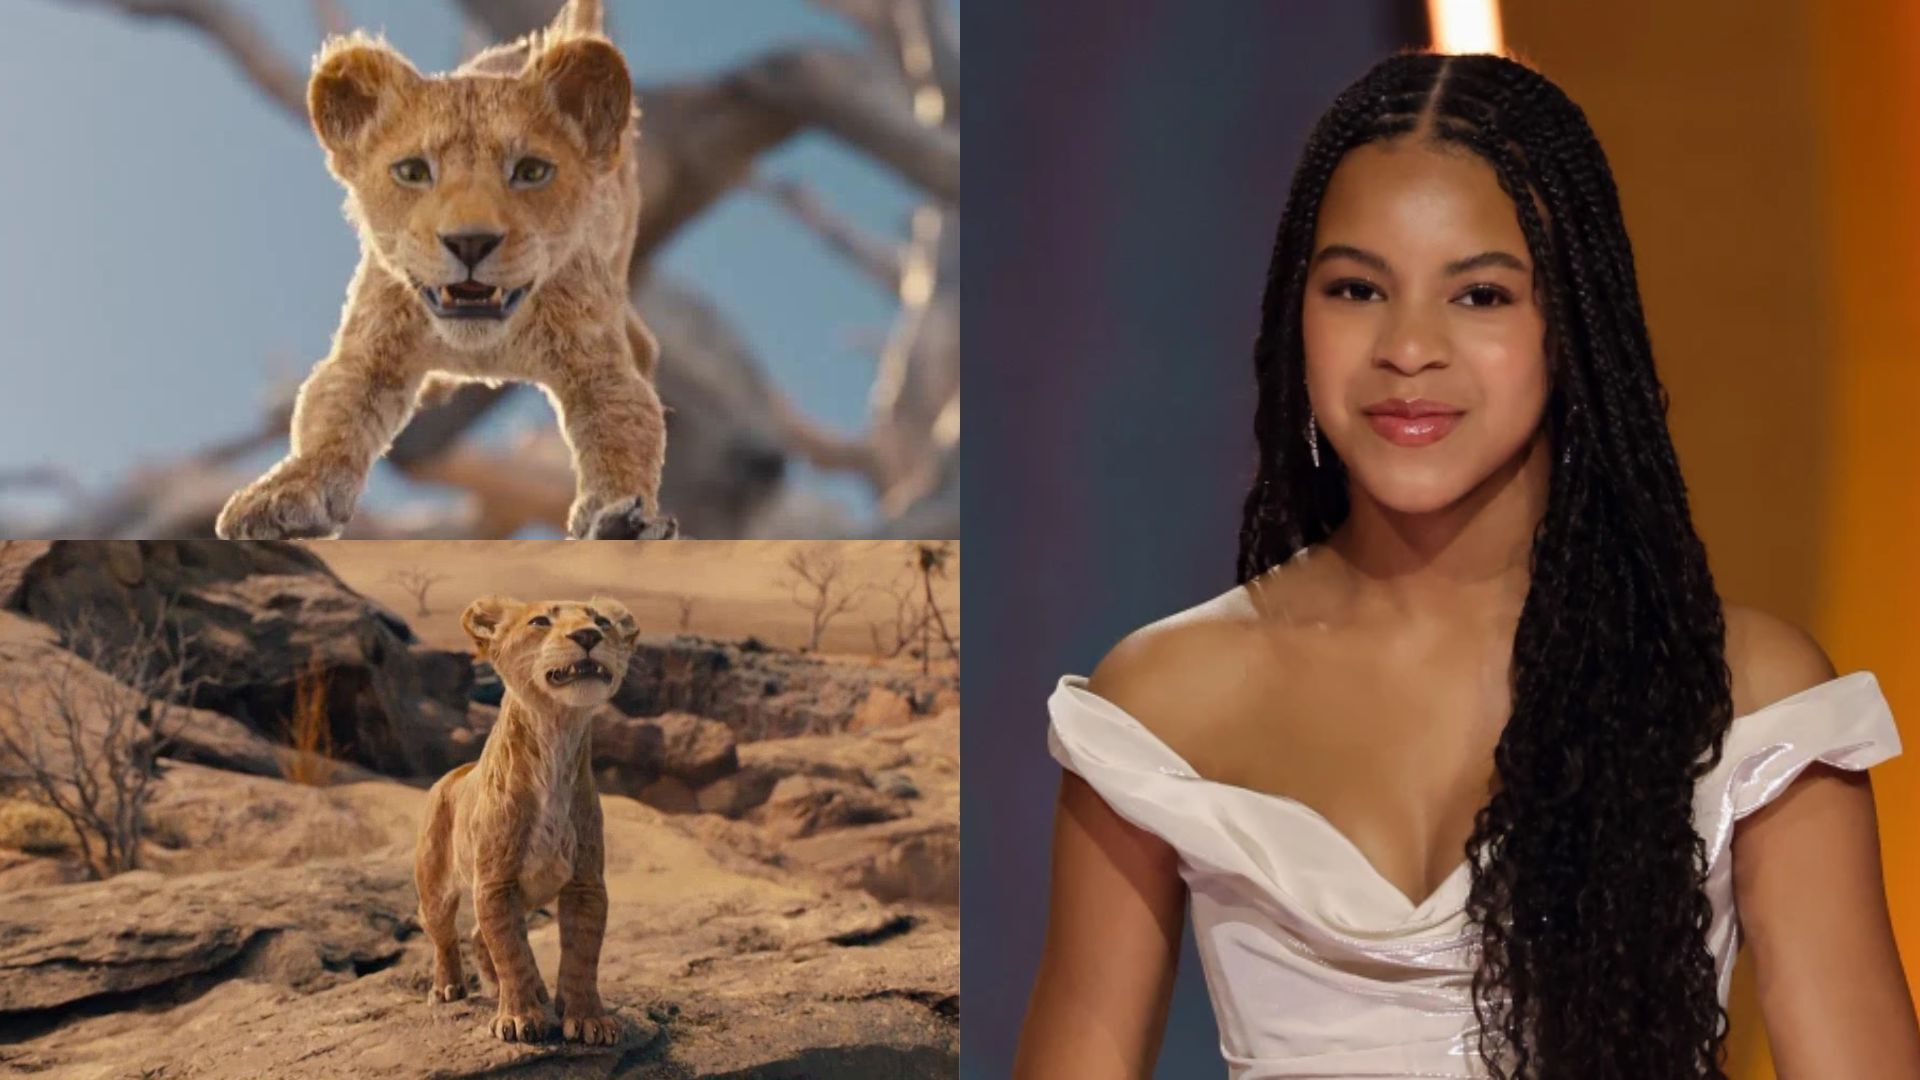 Beyoncé's daughter Blue Ivy makes her feature film debut in 'Mufasa'